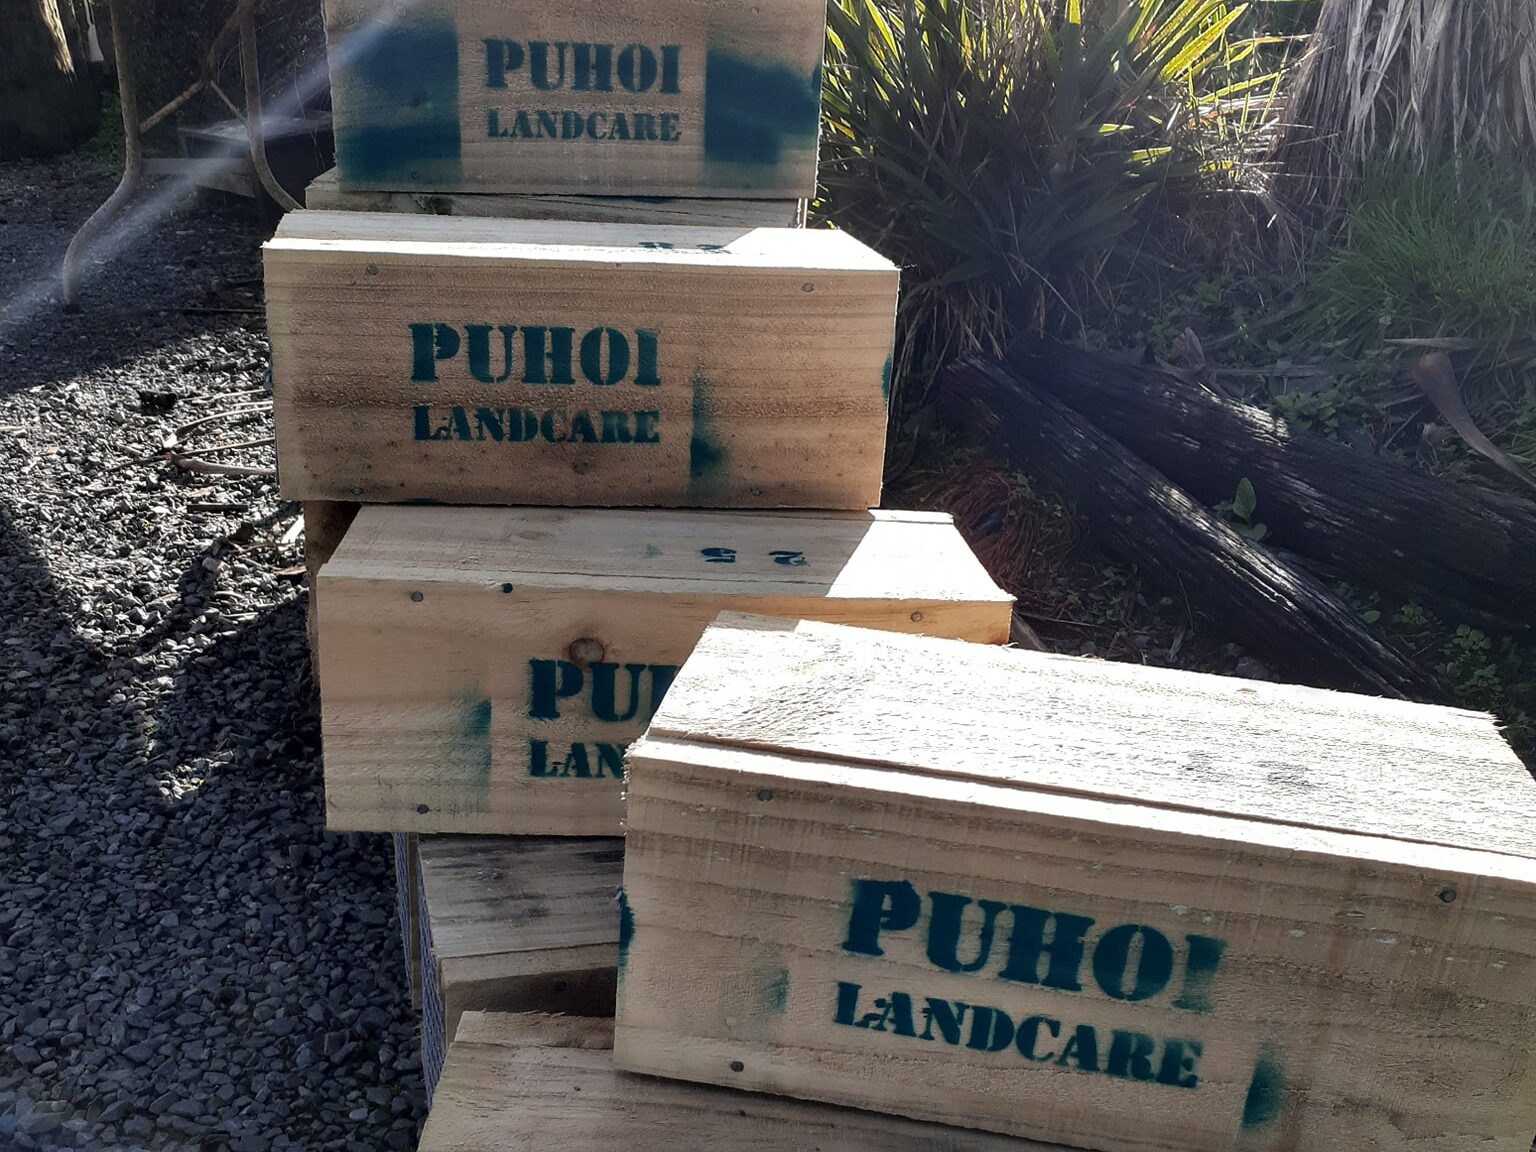 Wooden traps with Puhoi Landcare written on the side.